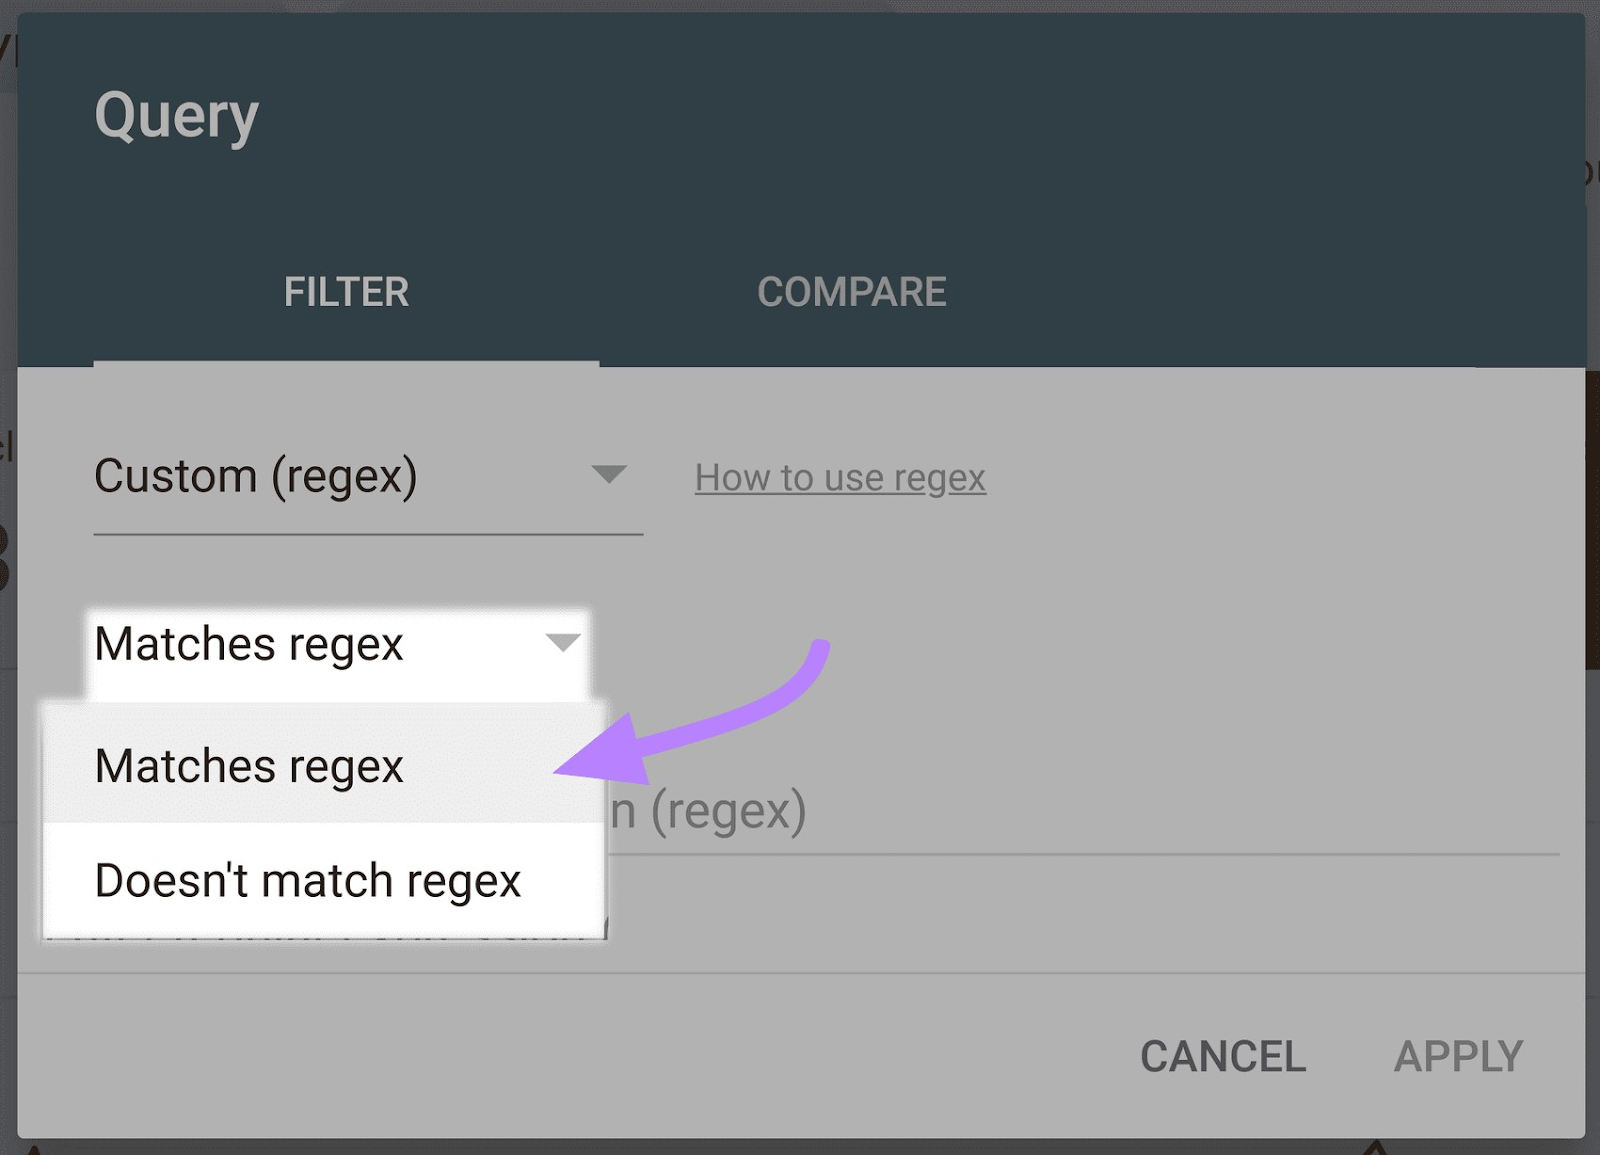 “Matches regex" selected from the drop-down menu